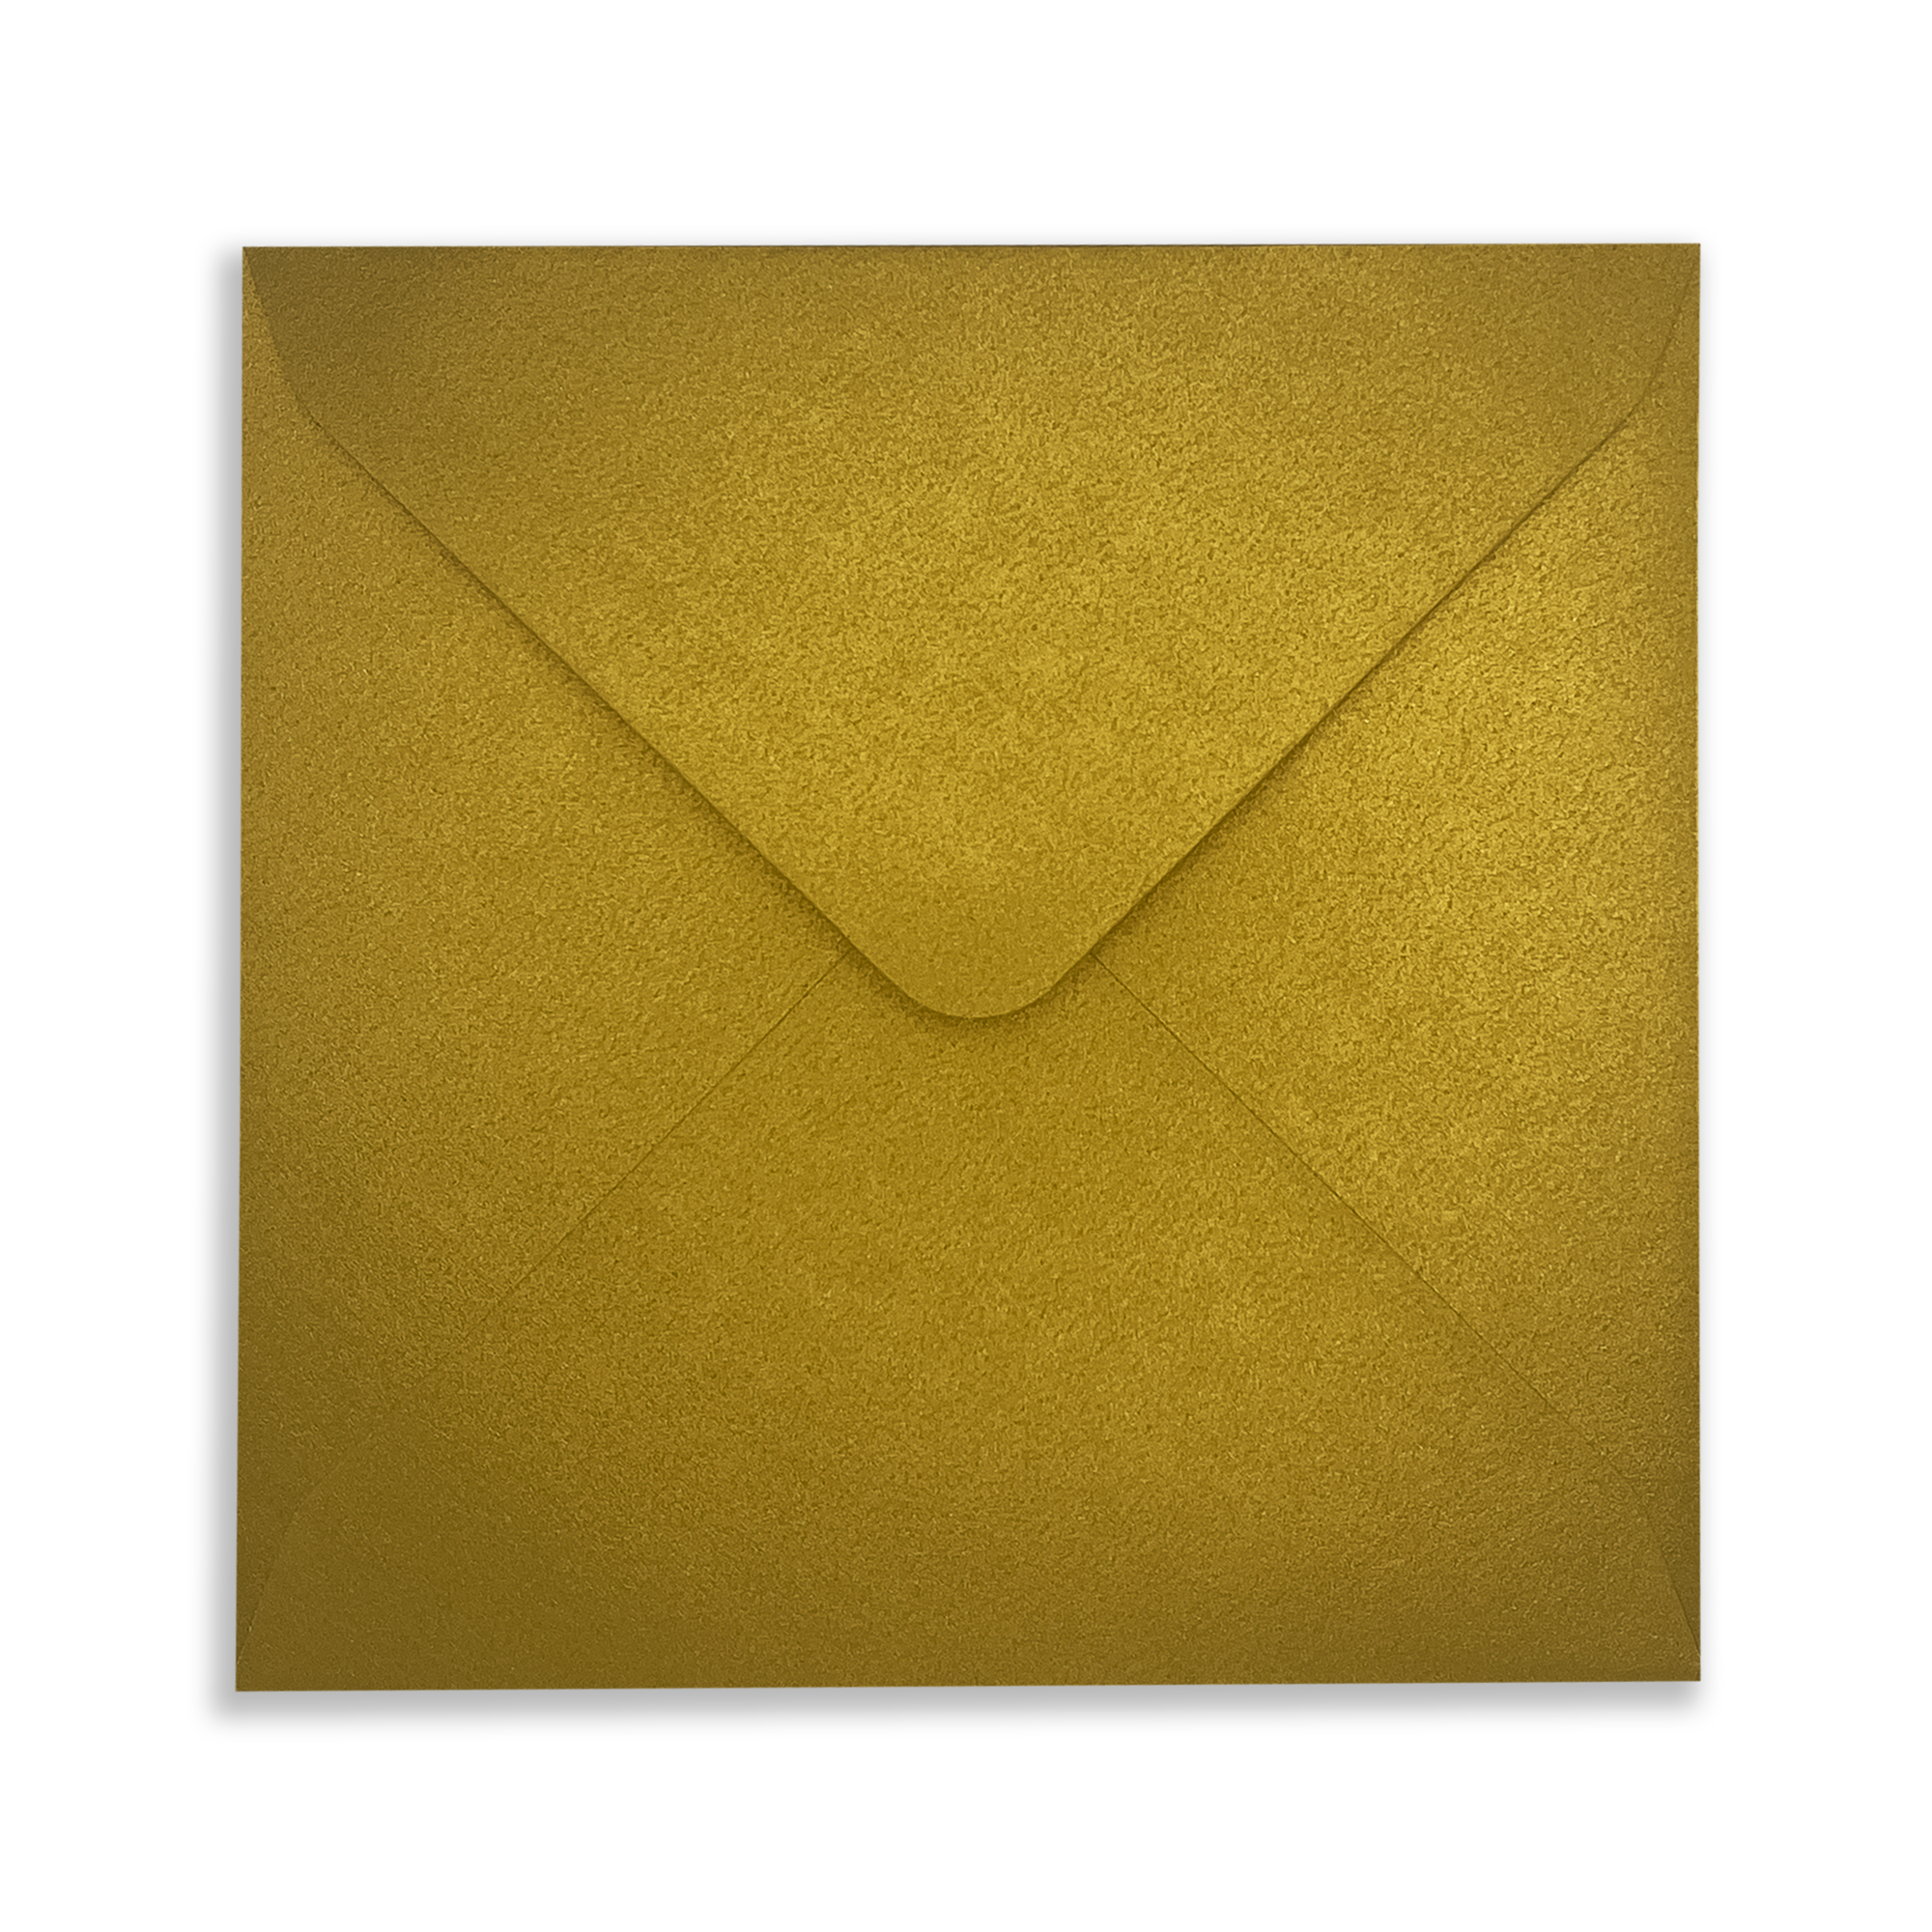 130mm_Square_Empire_Gold_Envelope_Front